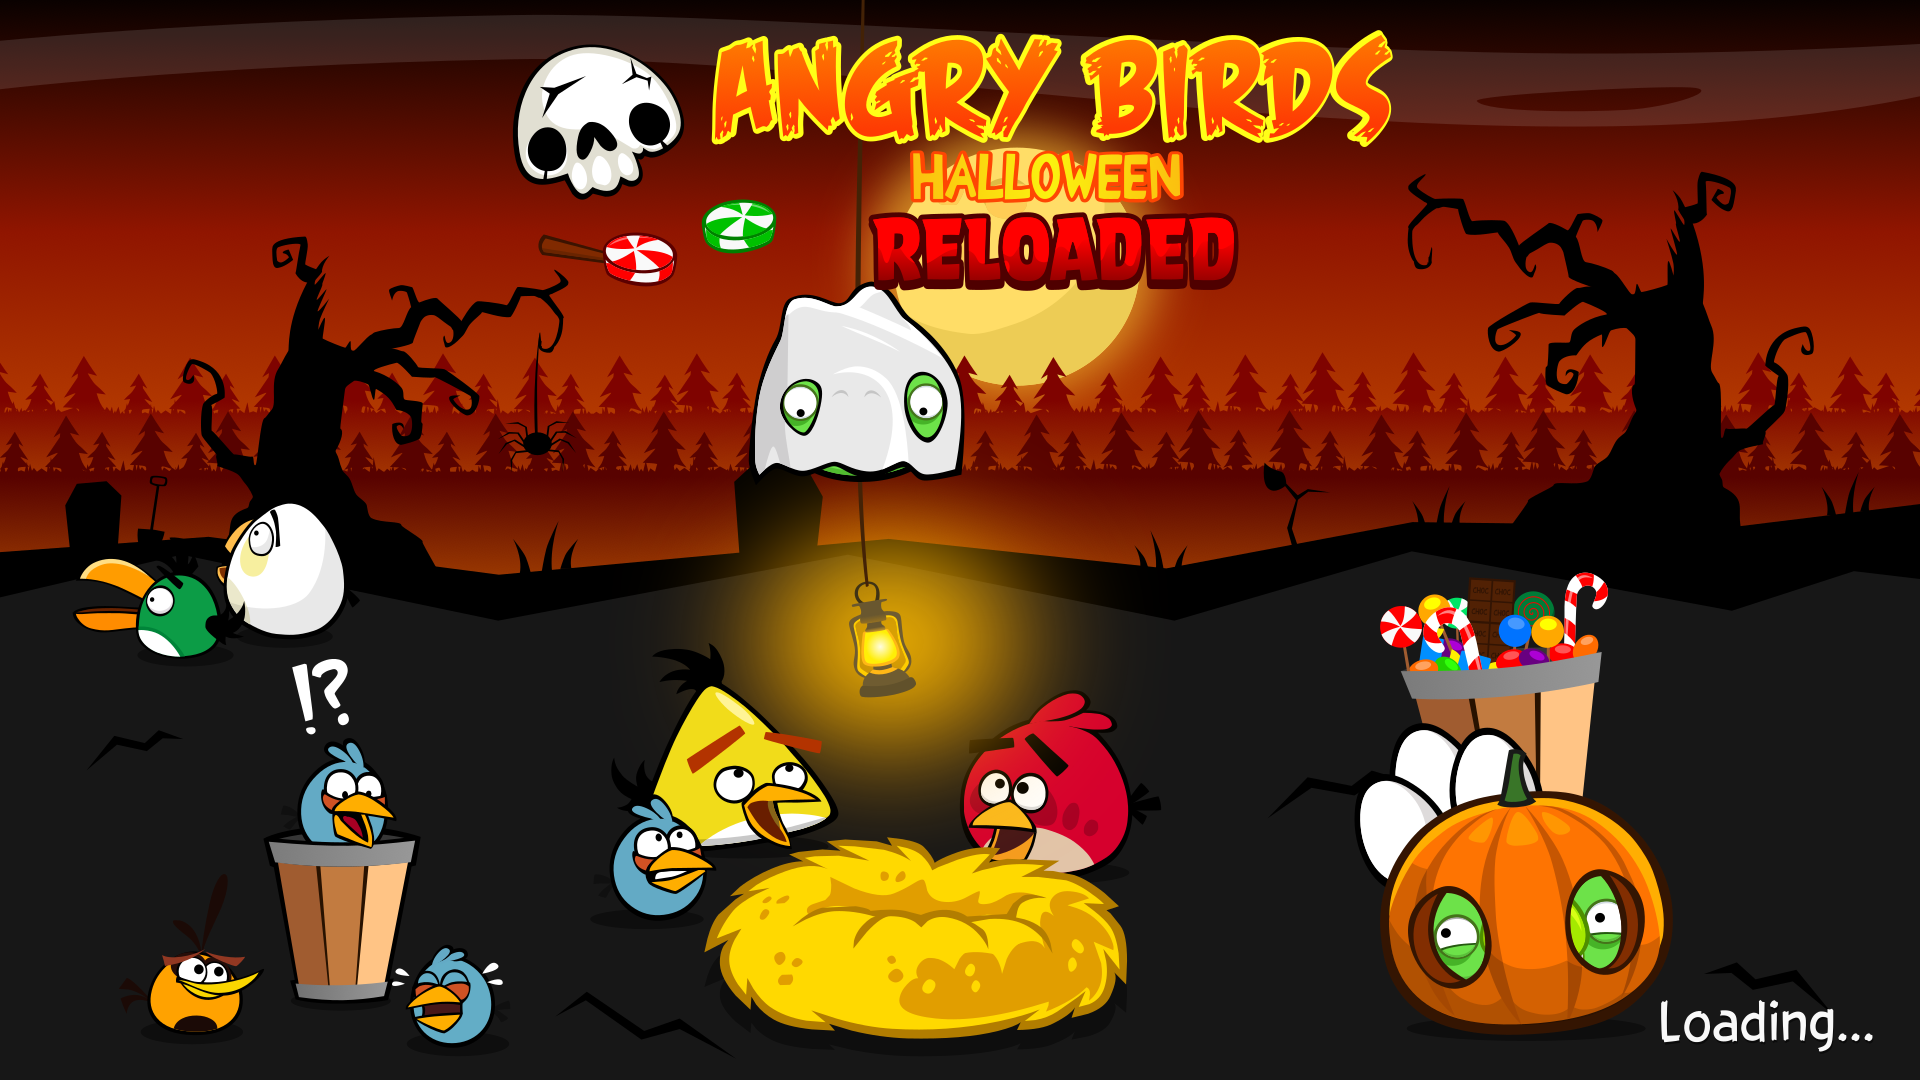 Angry Birds Halloween Reloaded